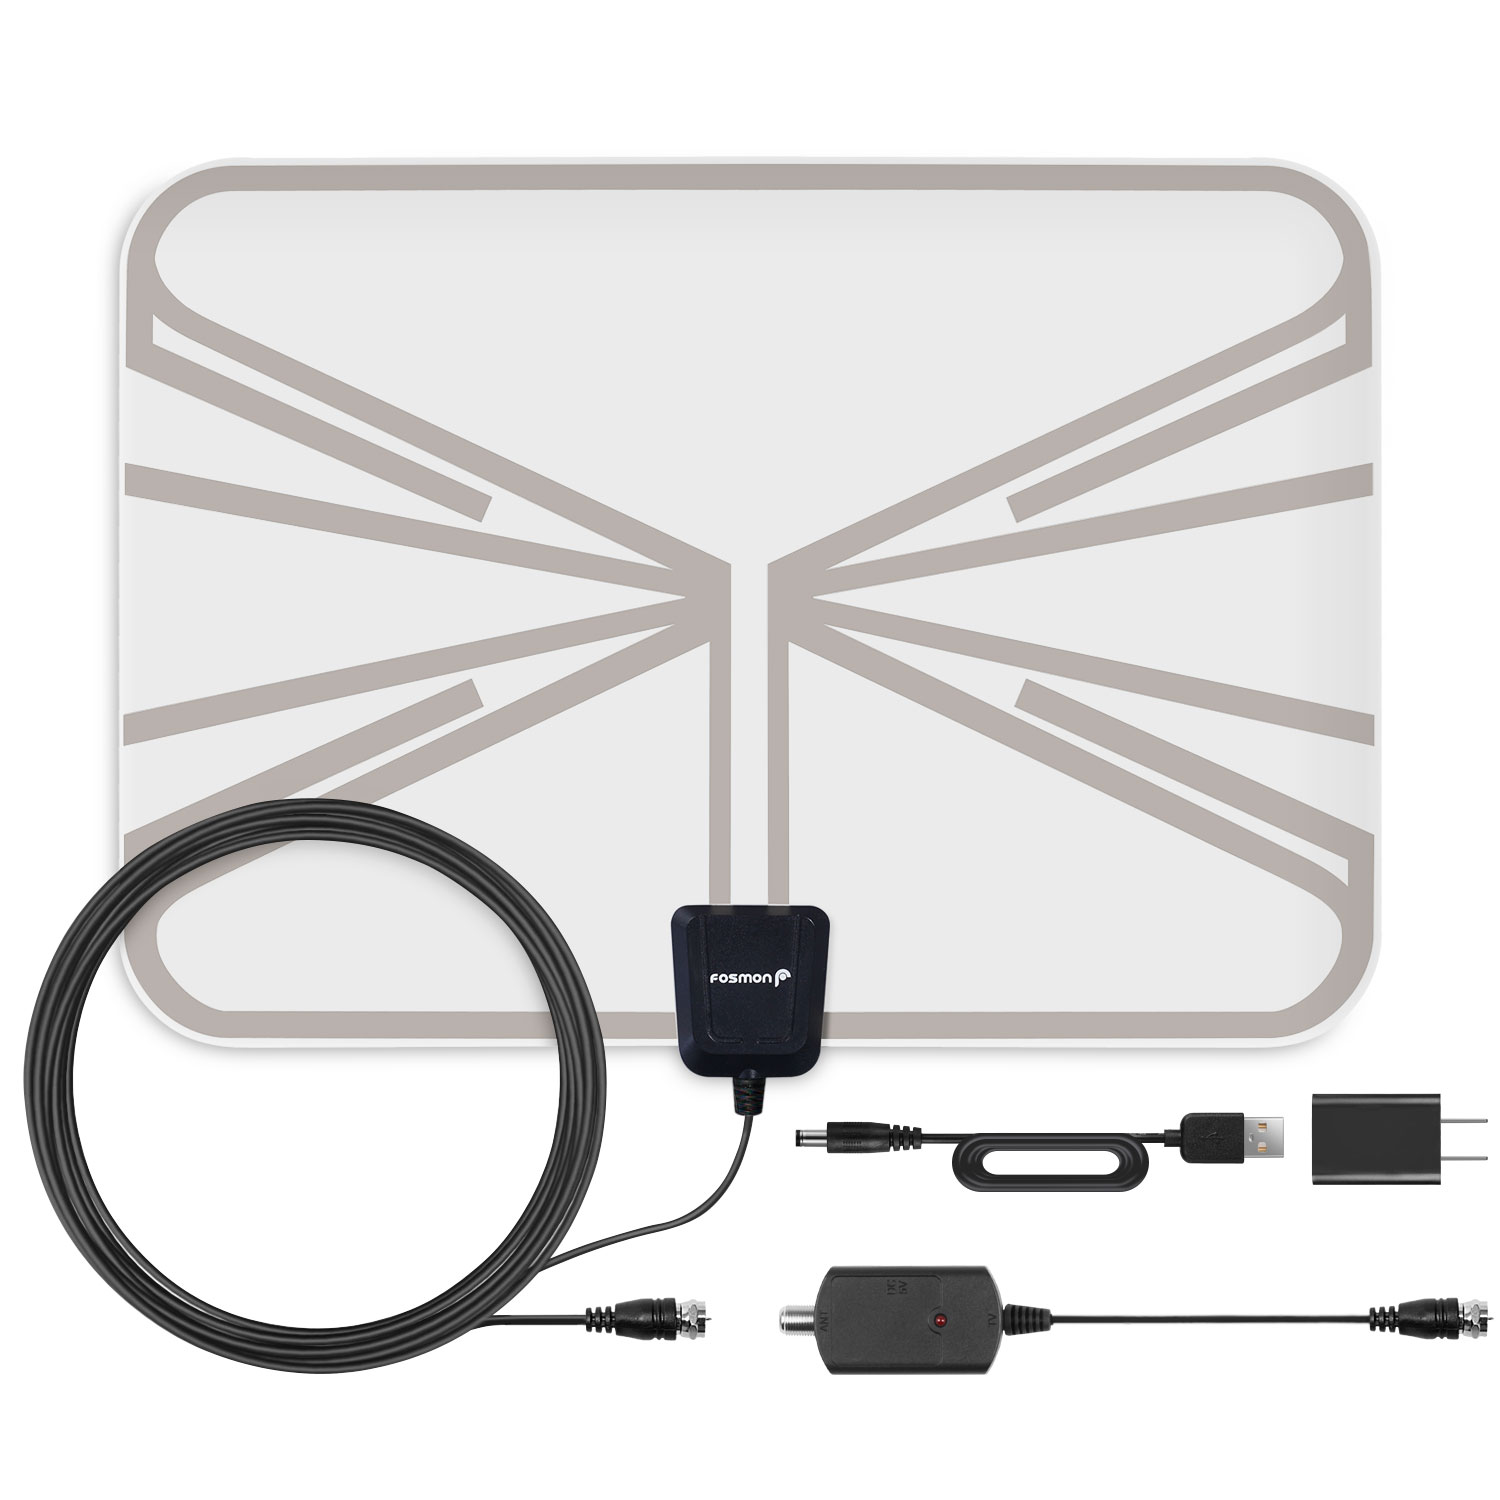 Fosmon 60 miles indoor ultra-thin HDTV antenna for $16, free shipping